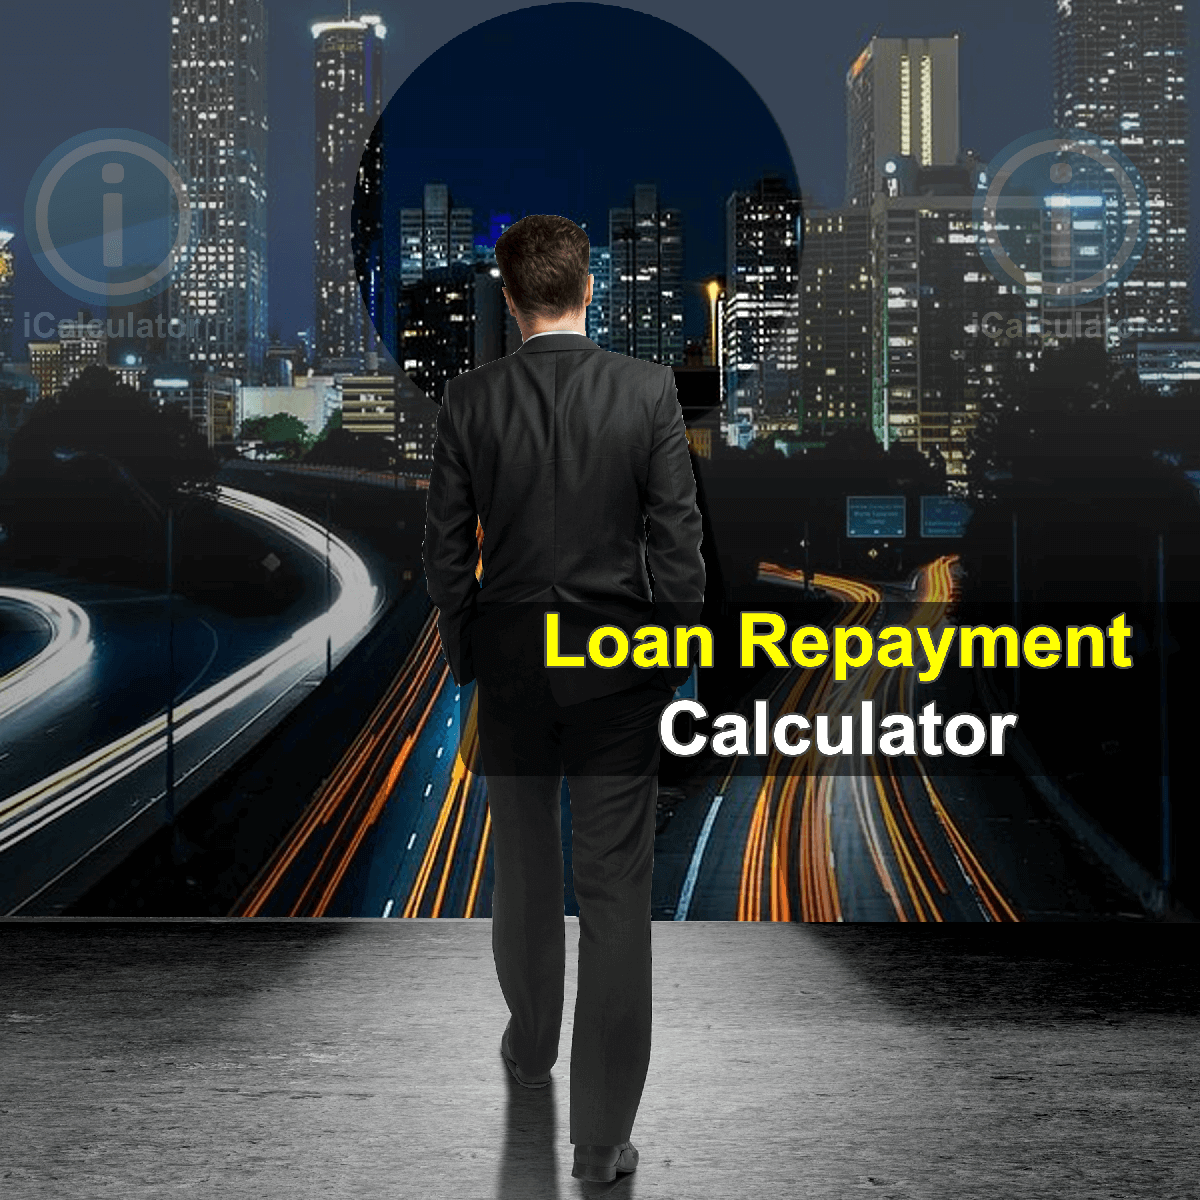 Annual Loan Repayment Calculator. This image provides details of how to calculate annual loan repayments using a calculator and notepad. By using the Amortization Schedule formula, the Annual Loan Repayment Calculator provides a true calculation of the monthly repayments and the amount of interest from borrowing or investing using amortization formula